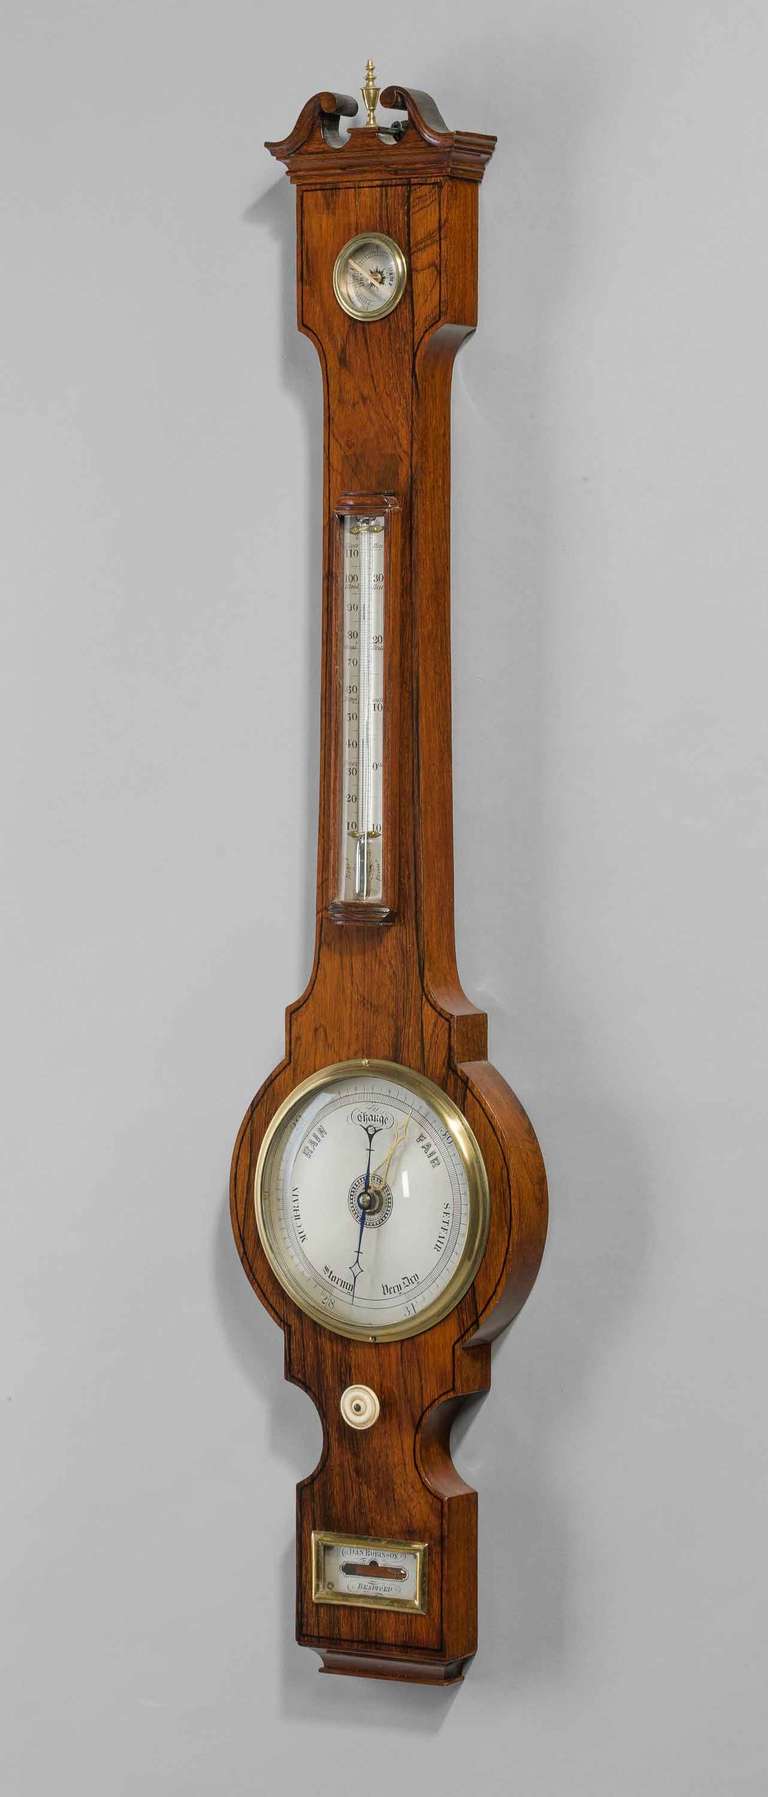 A very fine Regency period 6 ins dial Barometer by Robinson of Bradford, with ebony line decoration, silvered dial, thermometer, hygrometer, spirit level, having a swan neck pediment with a brass finial.

Dan Robinson of Bradford. Yorkshire.

